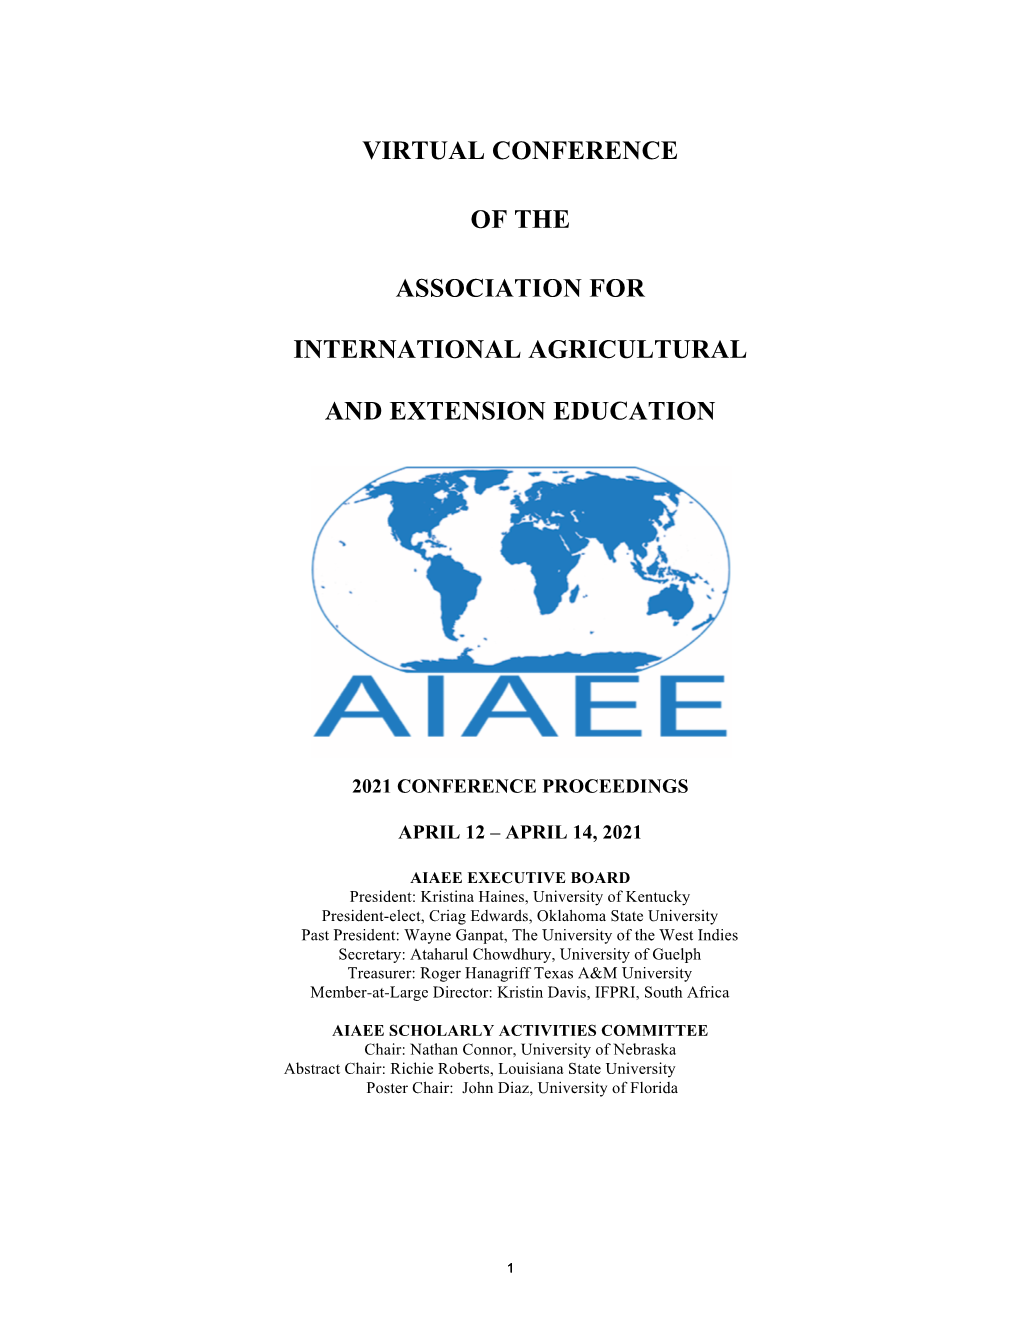 Virtual Conference of the Association for International Agricultural And